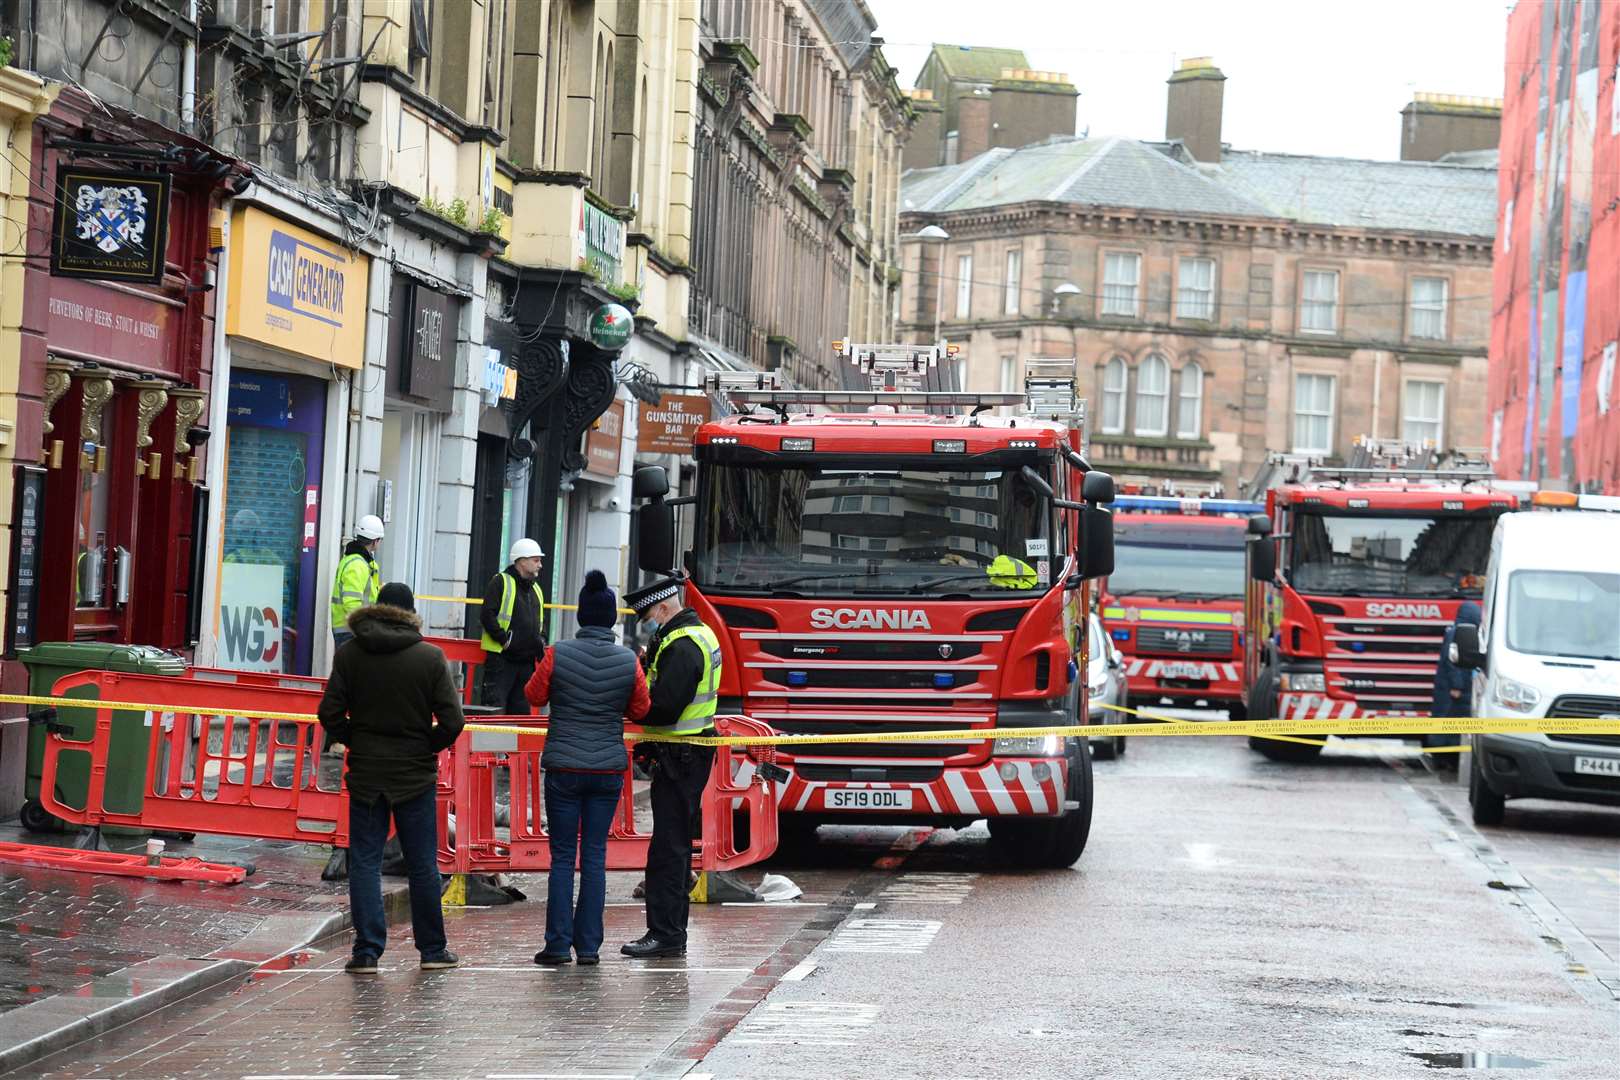 Three fire appliances from Inverness and Dingwall were called to the fire at MacCallums Bar in Union Street, Inverness.